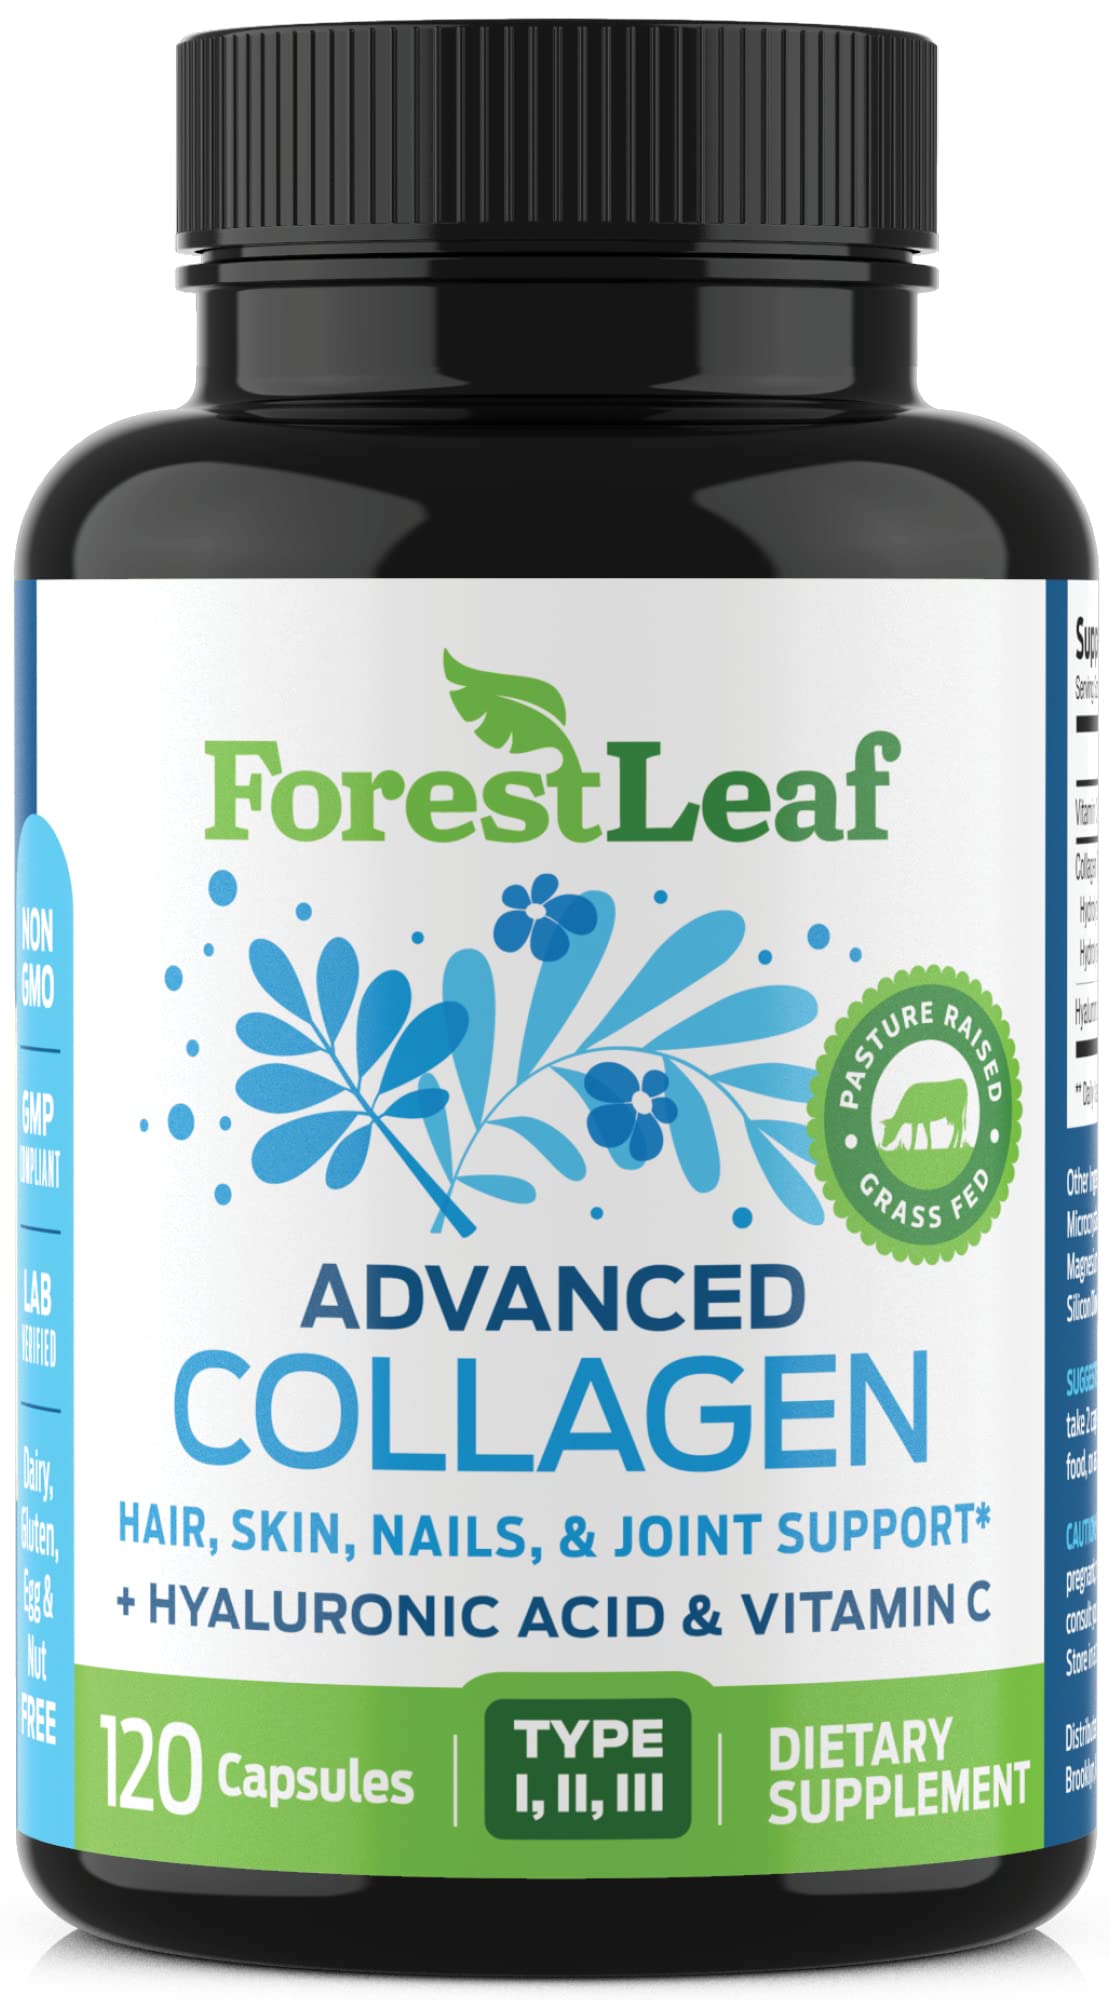 Mua ForestLeaf - Collagen Pills with Hyaluronic Acid & Vitamin C - Reduce  Wrinkles, Tighten Skin, Boost Hair, Skin, Nails & Joint Health - Hydrolyzed  Collagen Peptides Supplement - 120 Capsules trên